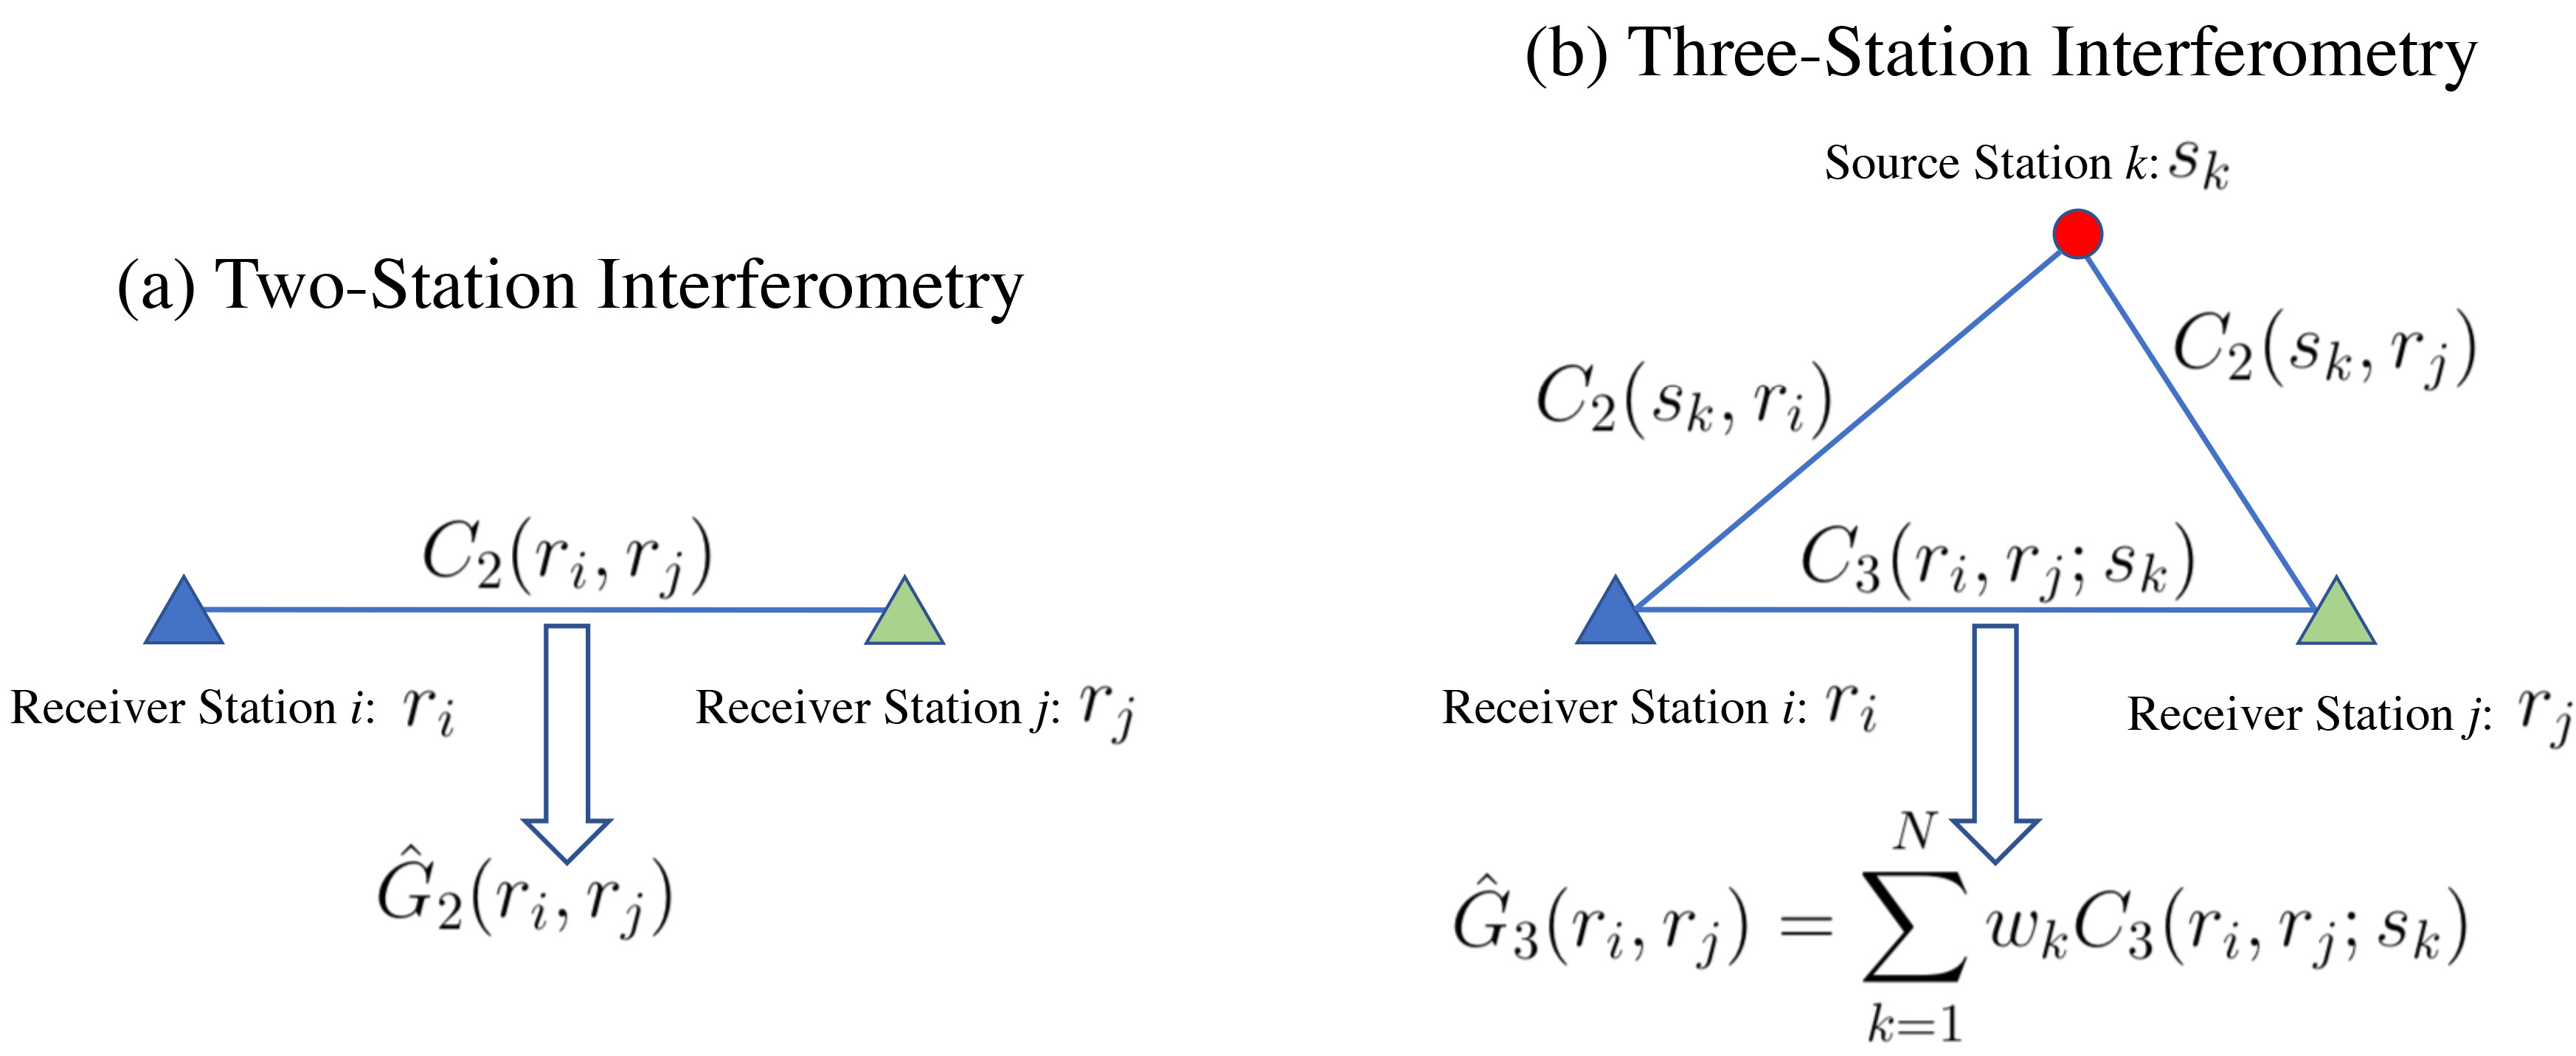 "ThreeStation: A Python package for performing three-station interferometry."